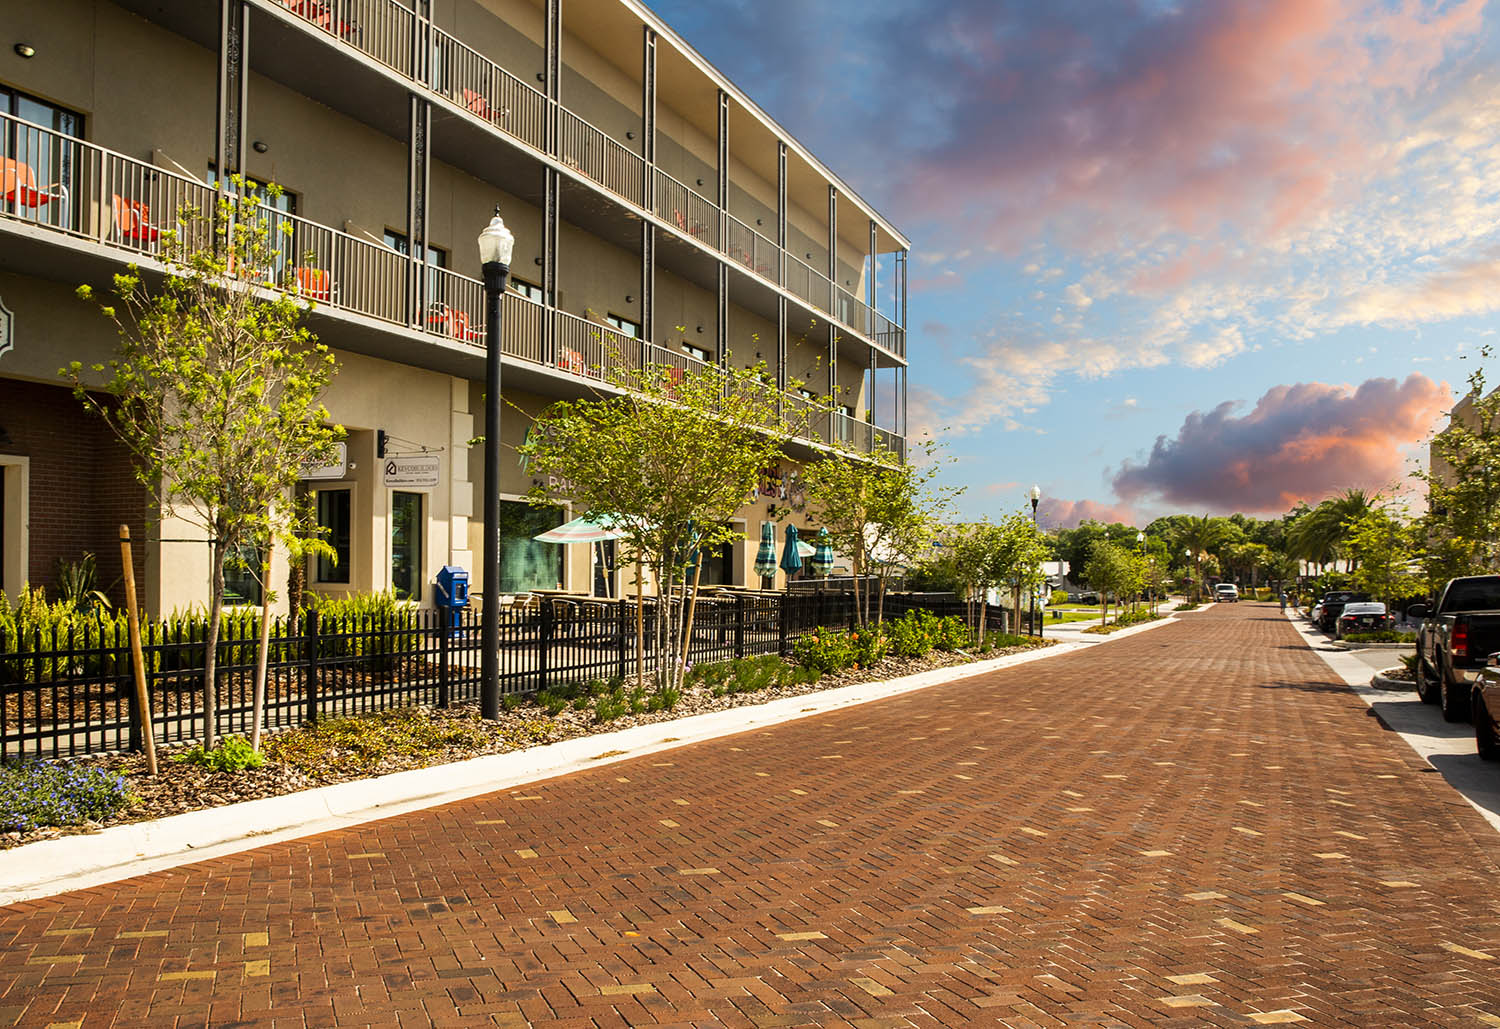 Photo at Sunset of the Tavares Red Brick Road